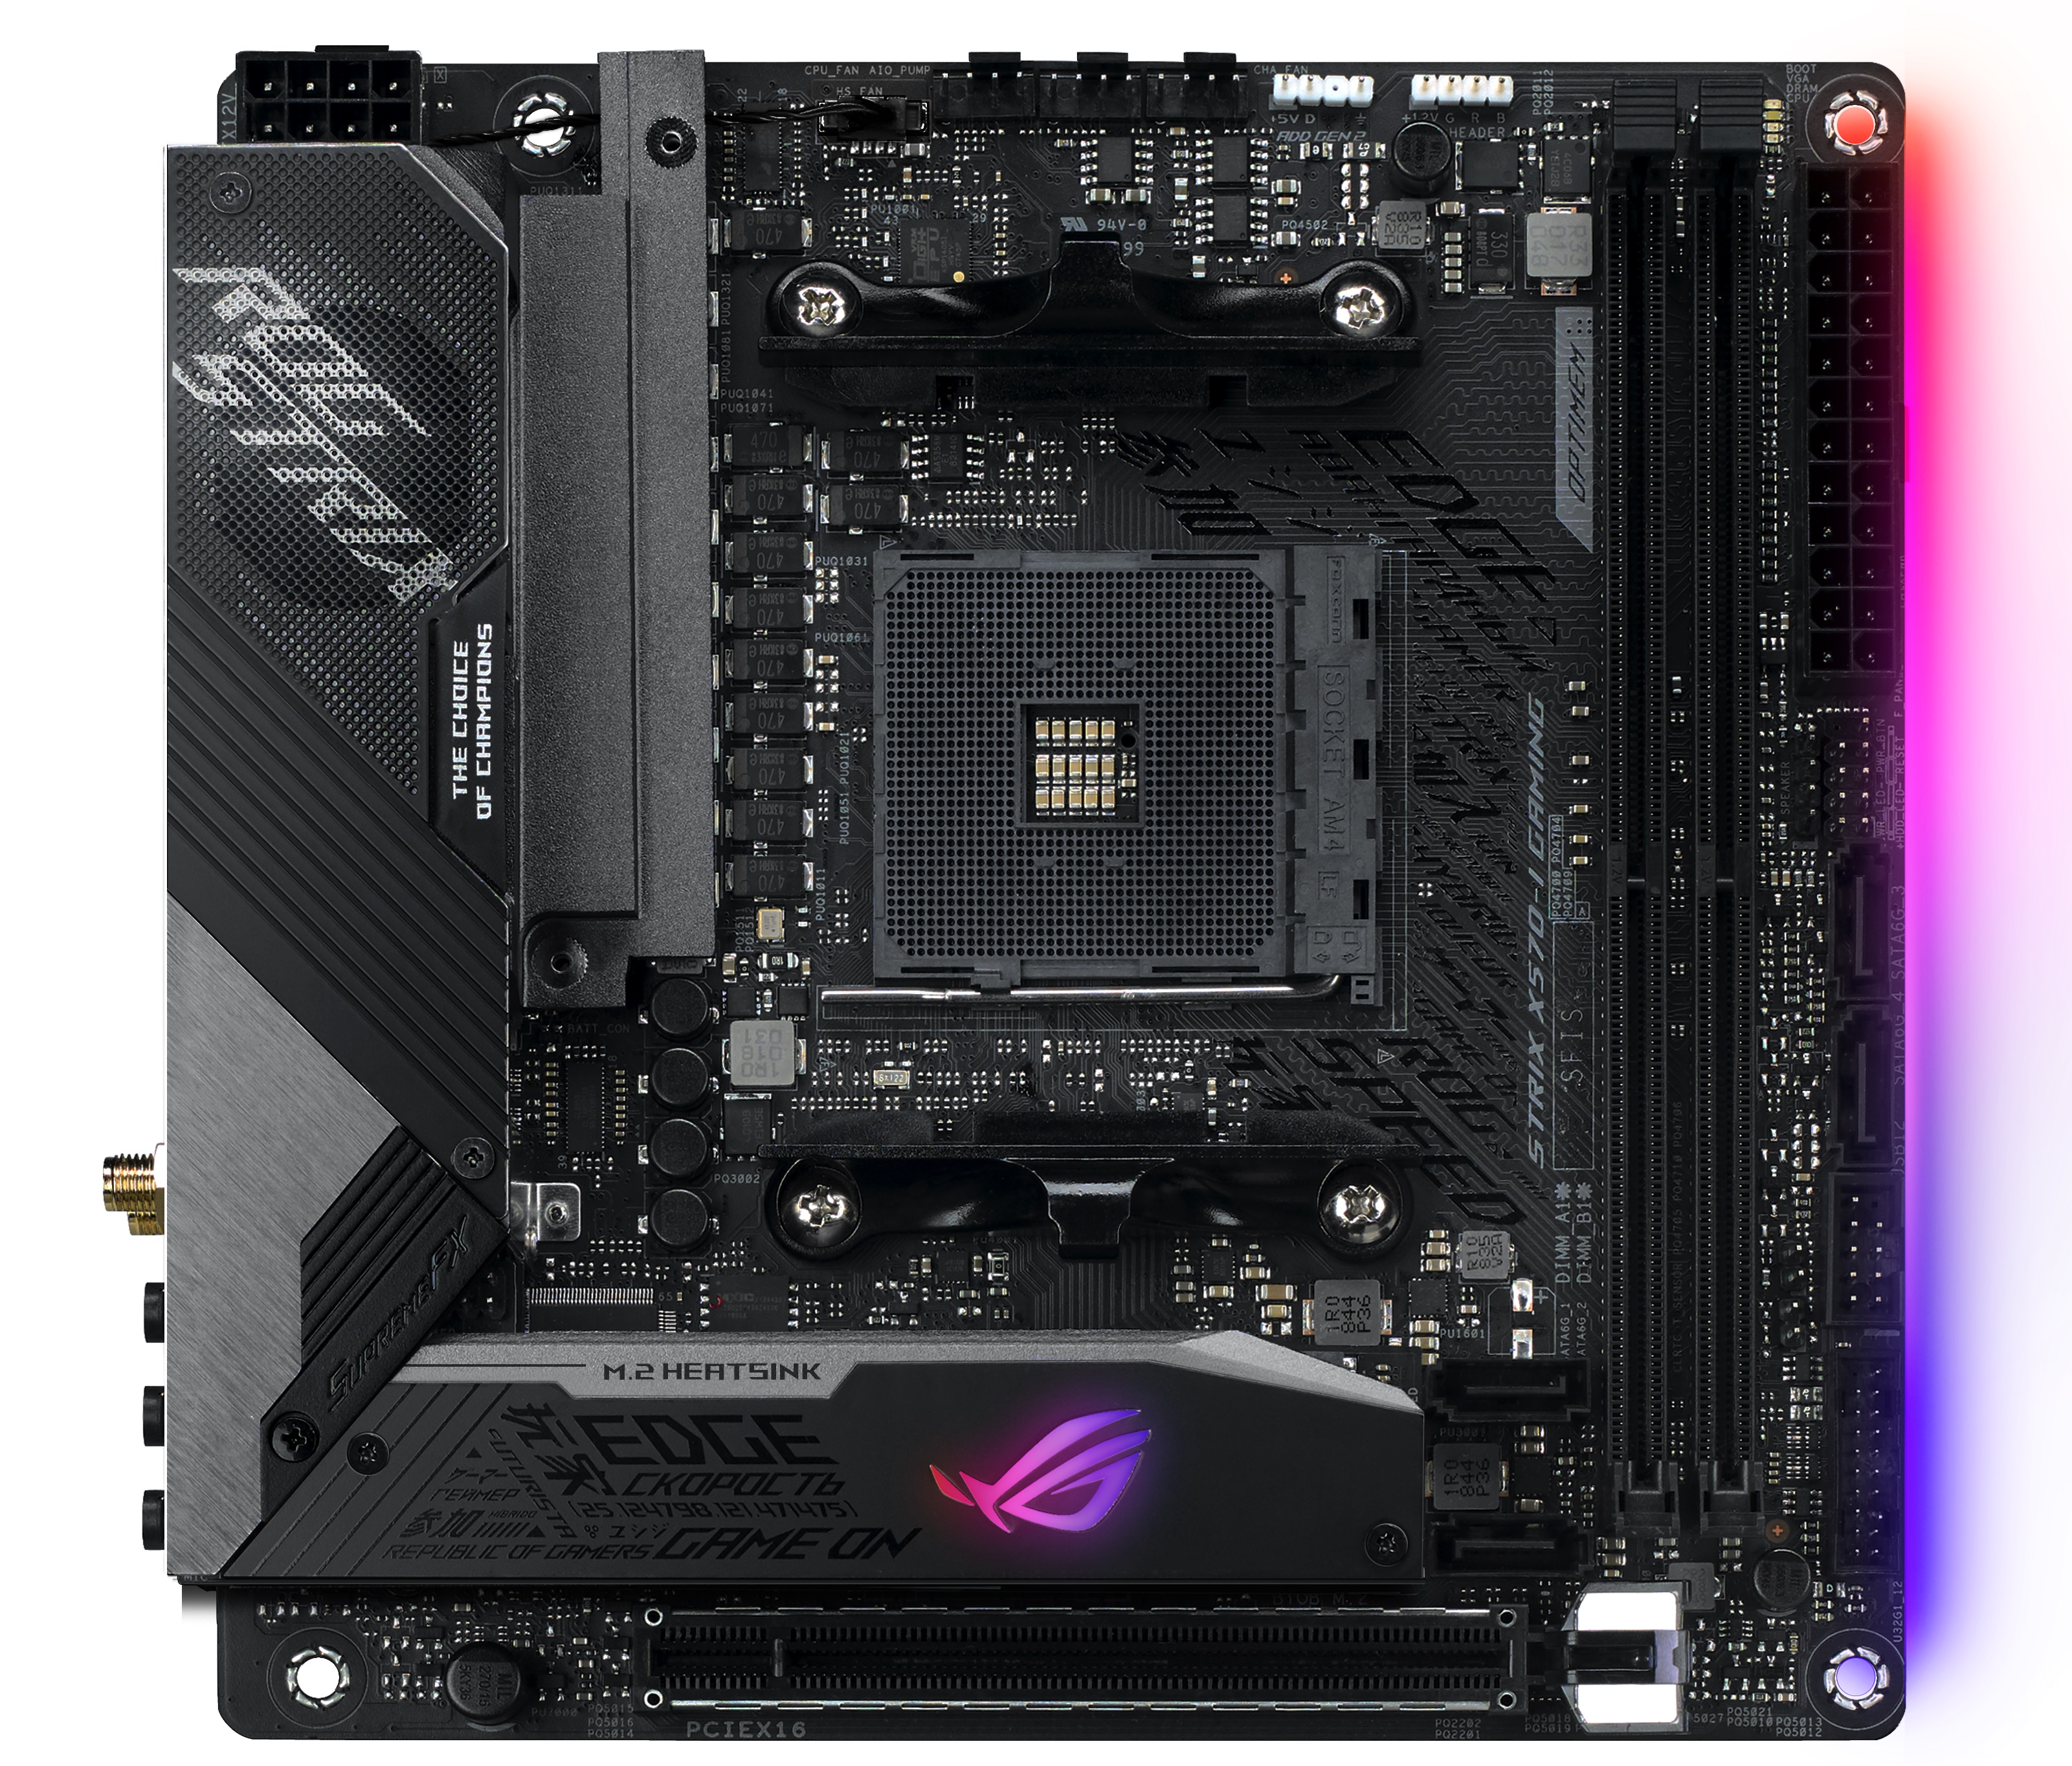 ASUS ROG Strix X570-I Gaming - The AMD X570 Motherboard Overview: Over